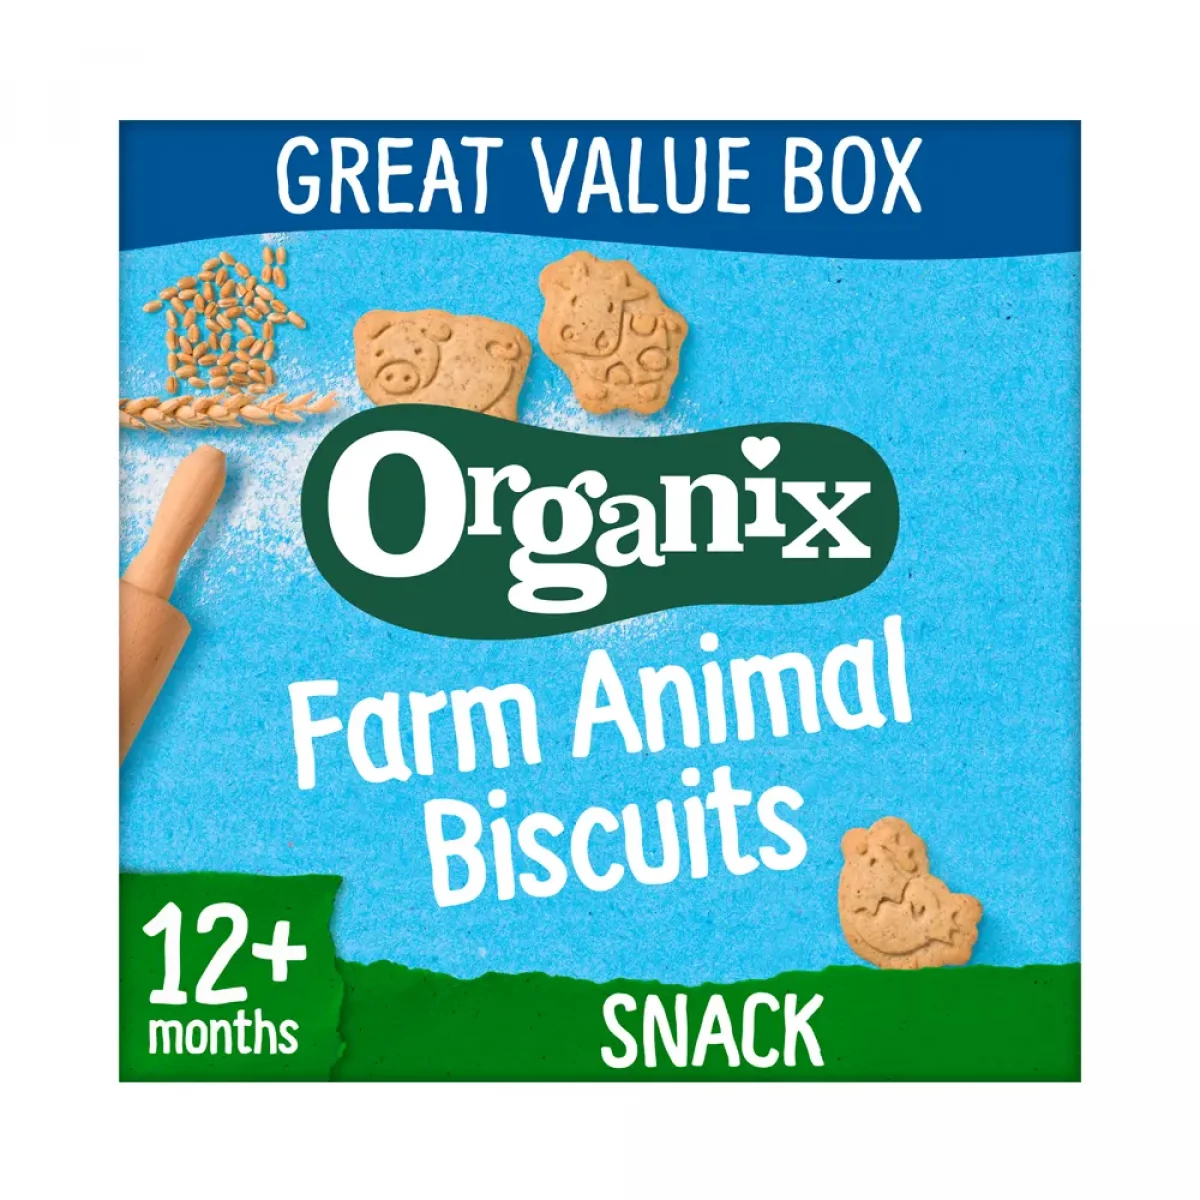 Product picture for Animal Biscuits